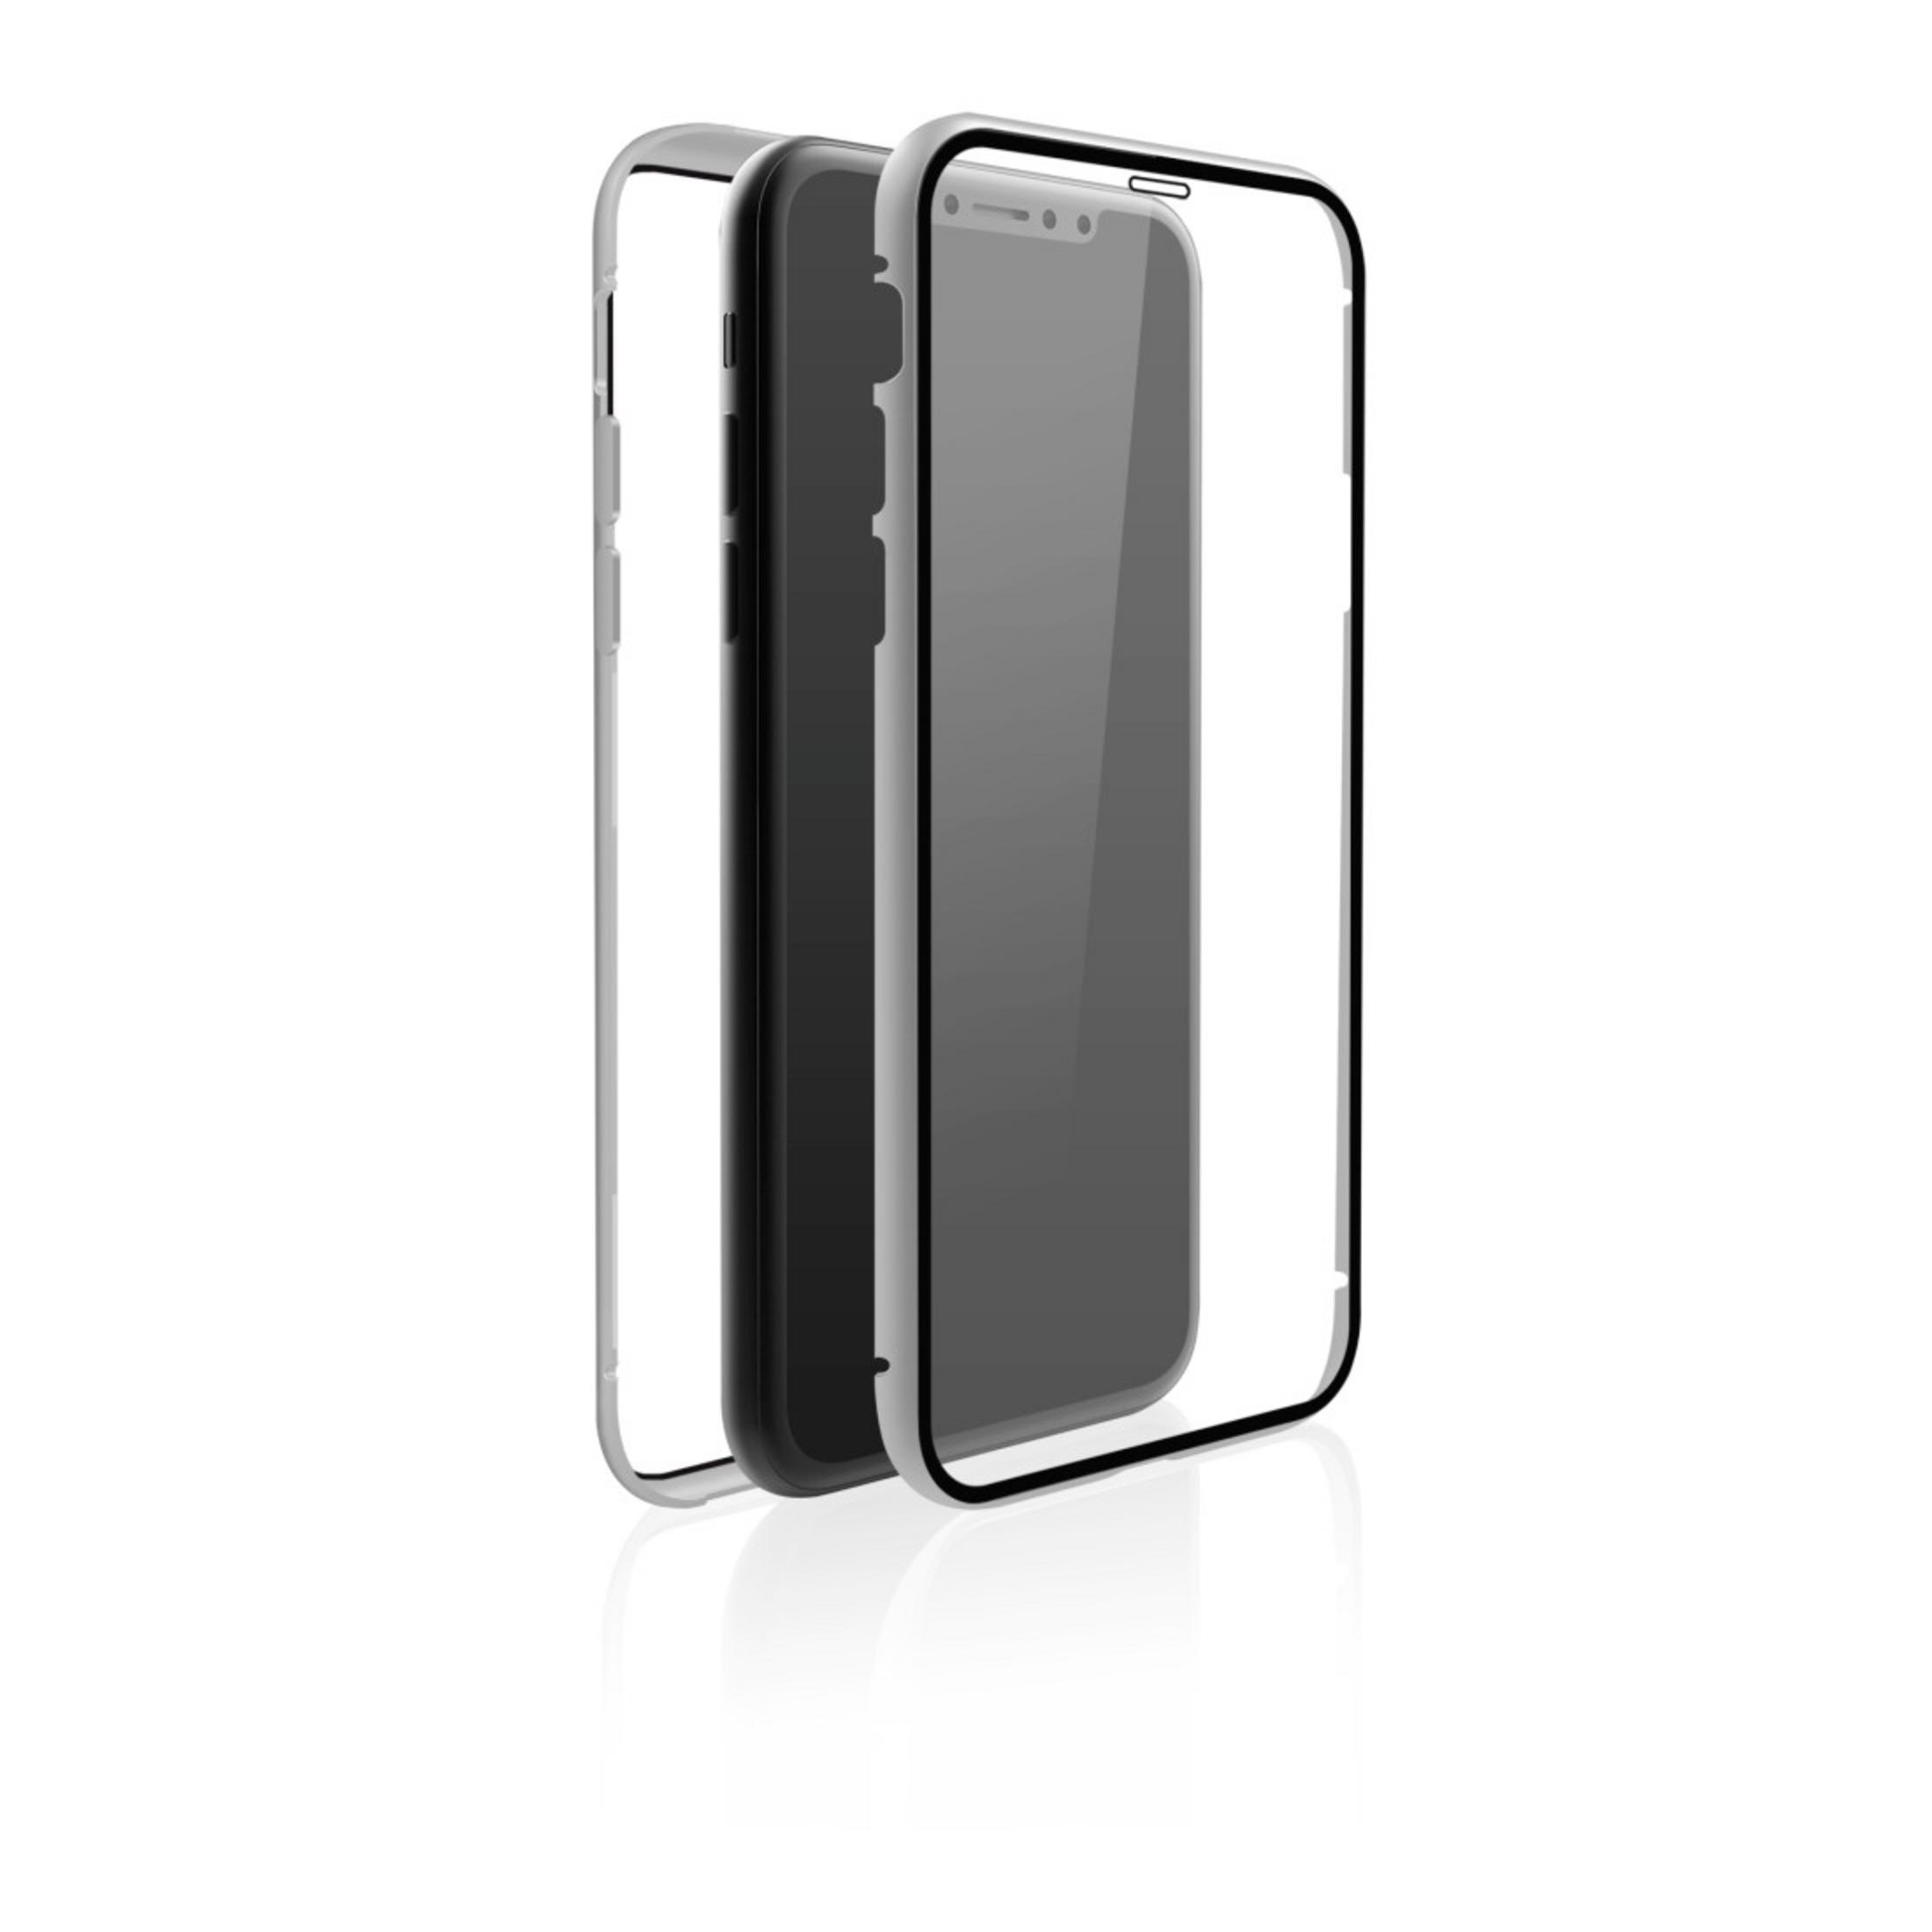 IPHONE Pro, 11 Apple, 186985 Silber PRO, Full 11 360° GLASS Cover, BLACK iPhone ROCK CO